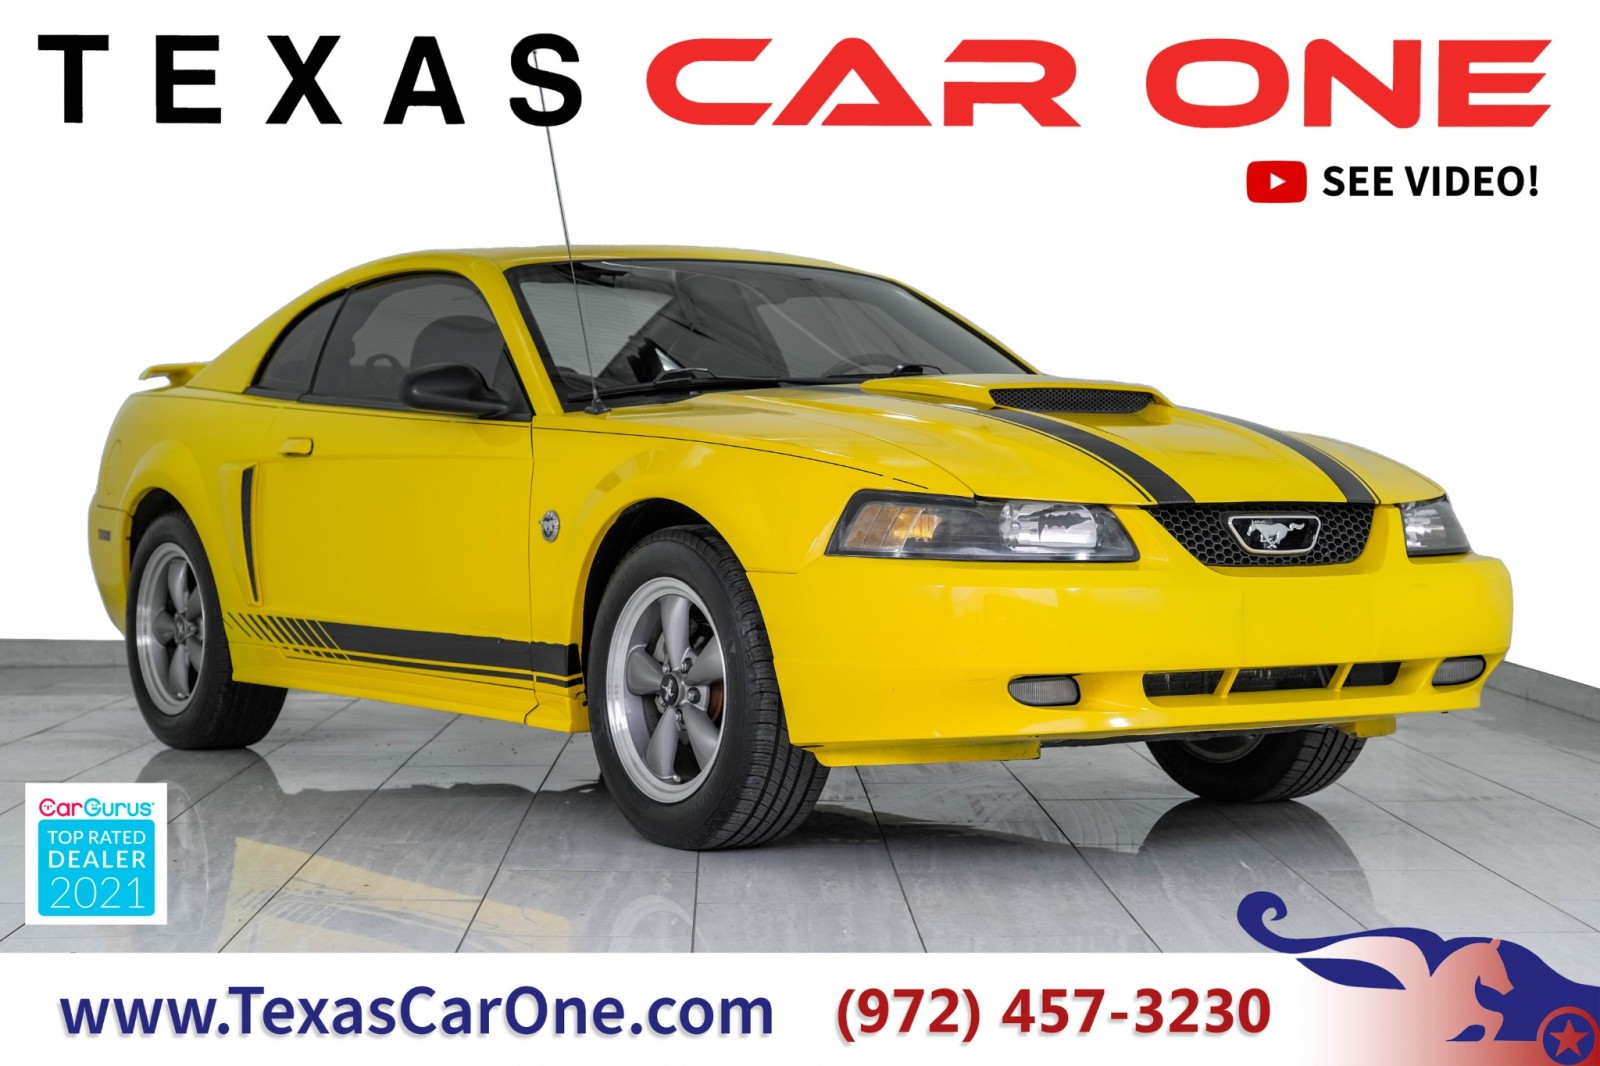 2004 Ford Mustang GT DELUXE LEATHER SEATS MACH AUDIO SYSTEM CRUISE C 1